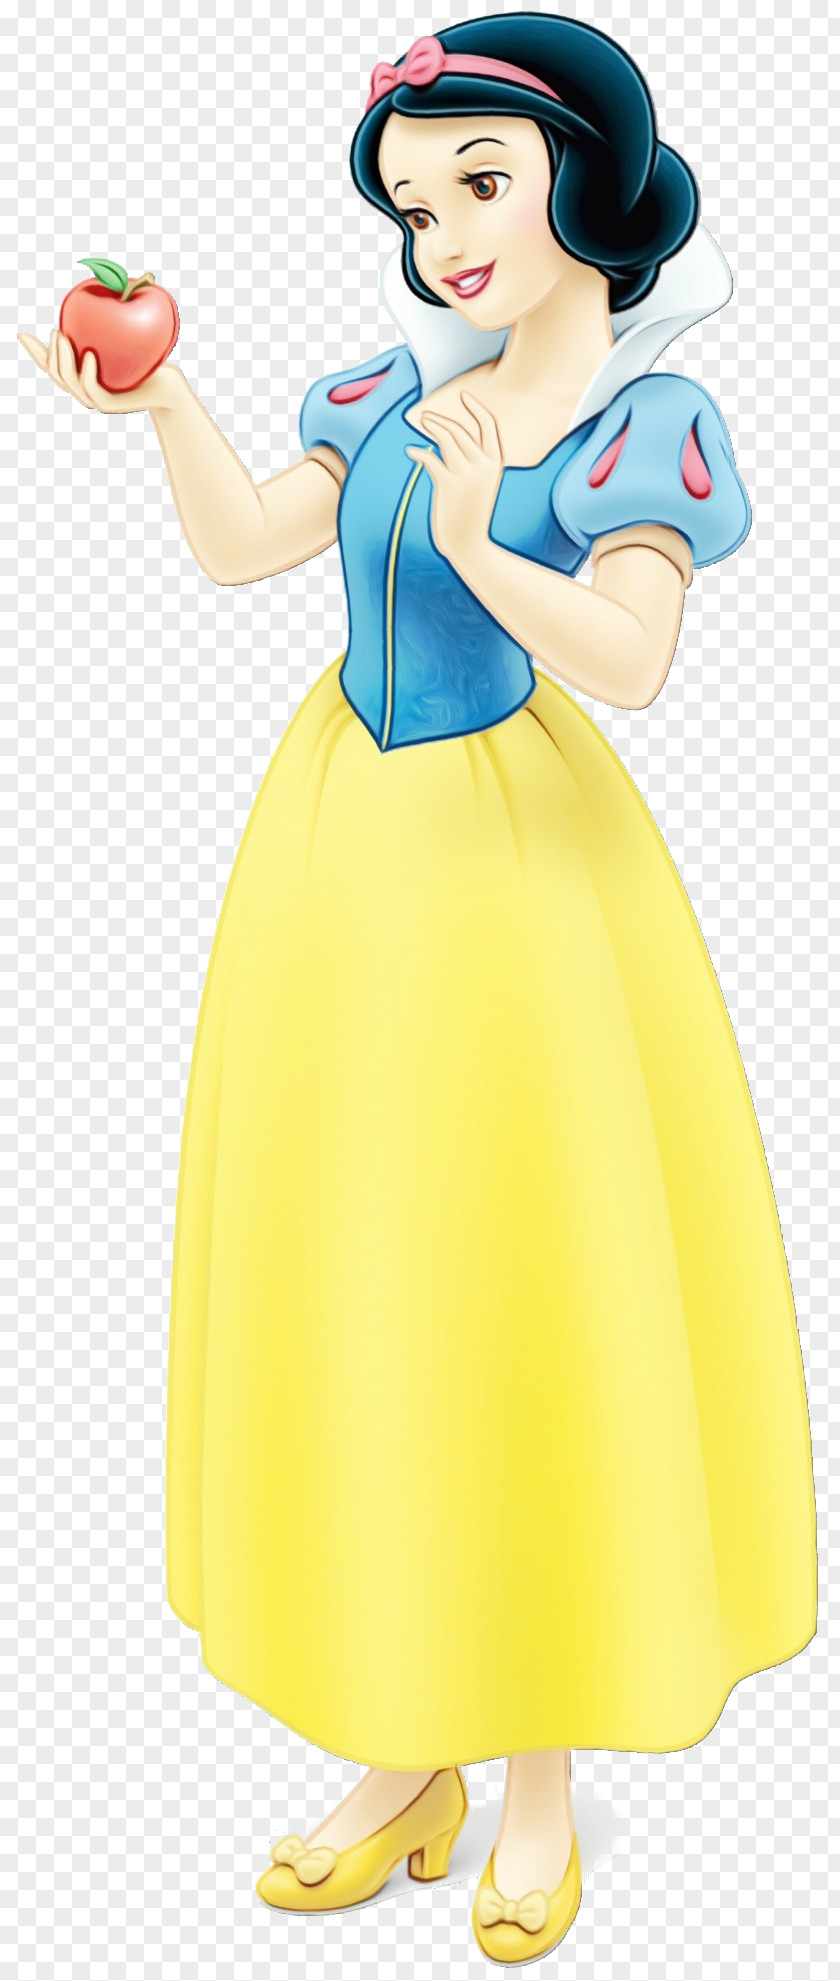 Illustration Clip Art Snow White And The Seven Dwarfs Yellow Design PNG